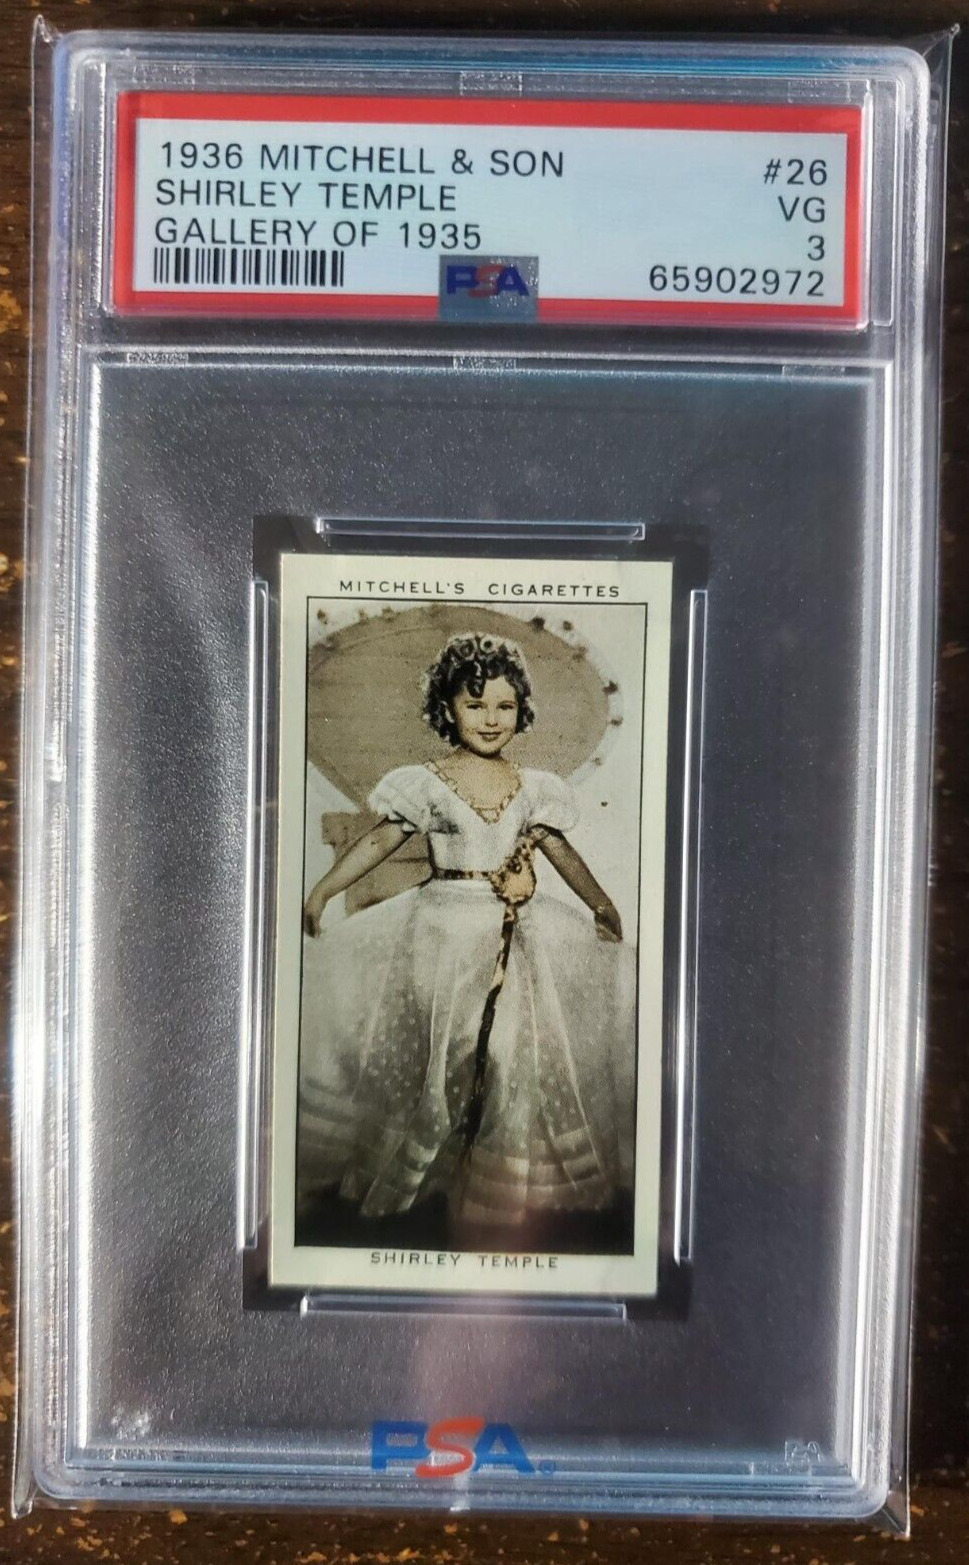 Shirley Temple - 1936 MItchell & Son - Gallery 1935 - #26 - PSA 3.